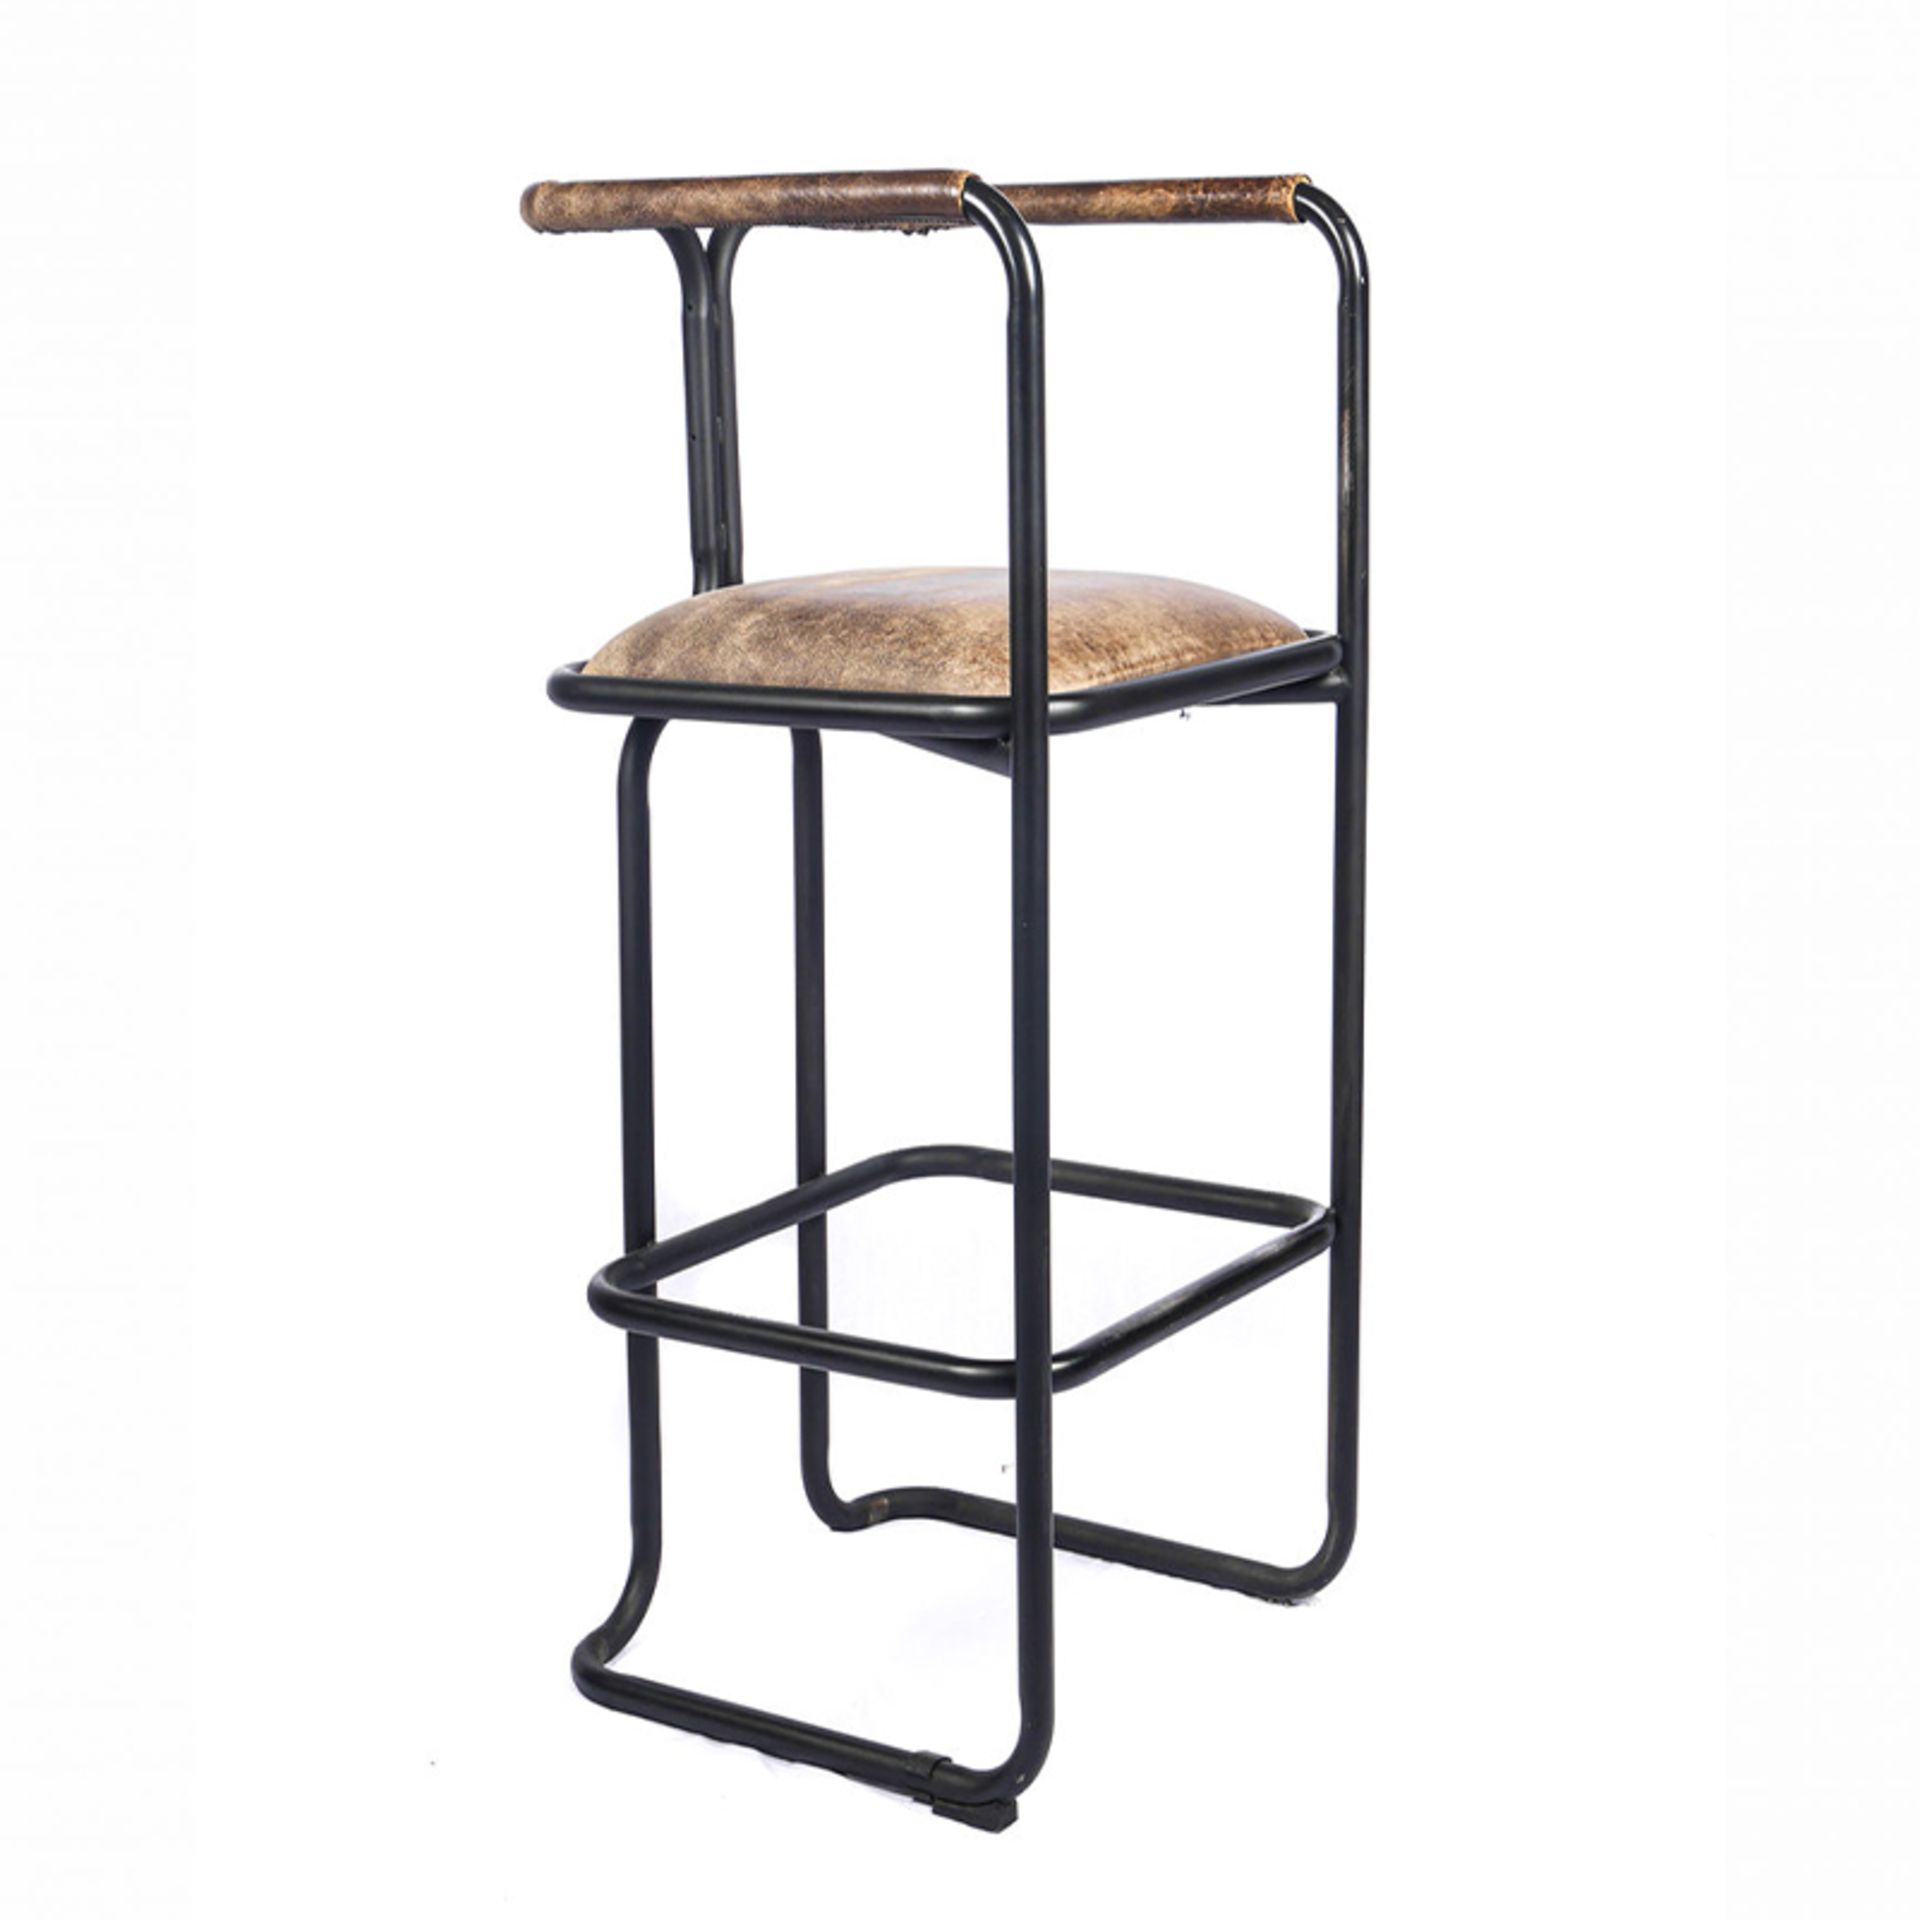 Circuit Barstool The "Circuit Barstool" from the Timothy Oulton brand is an industrial bar stool